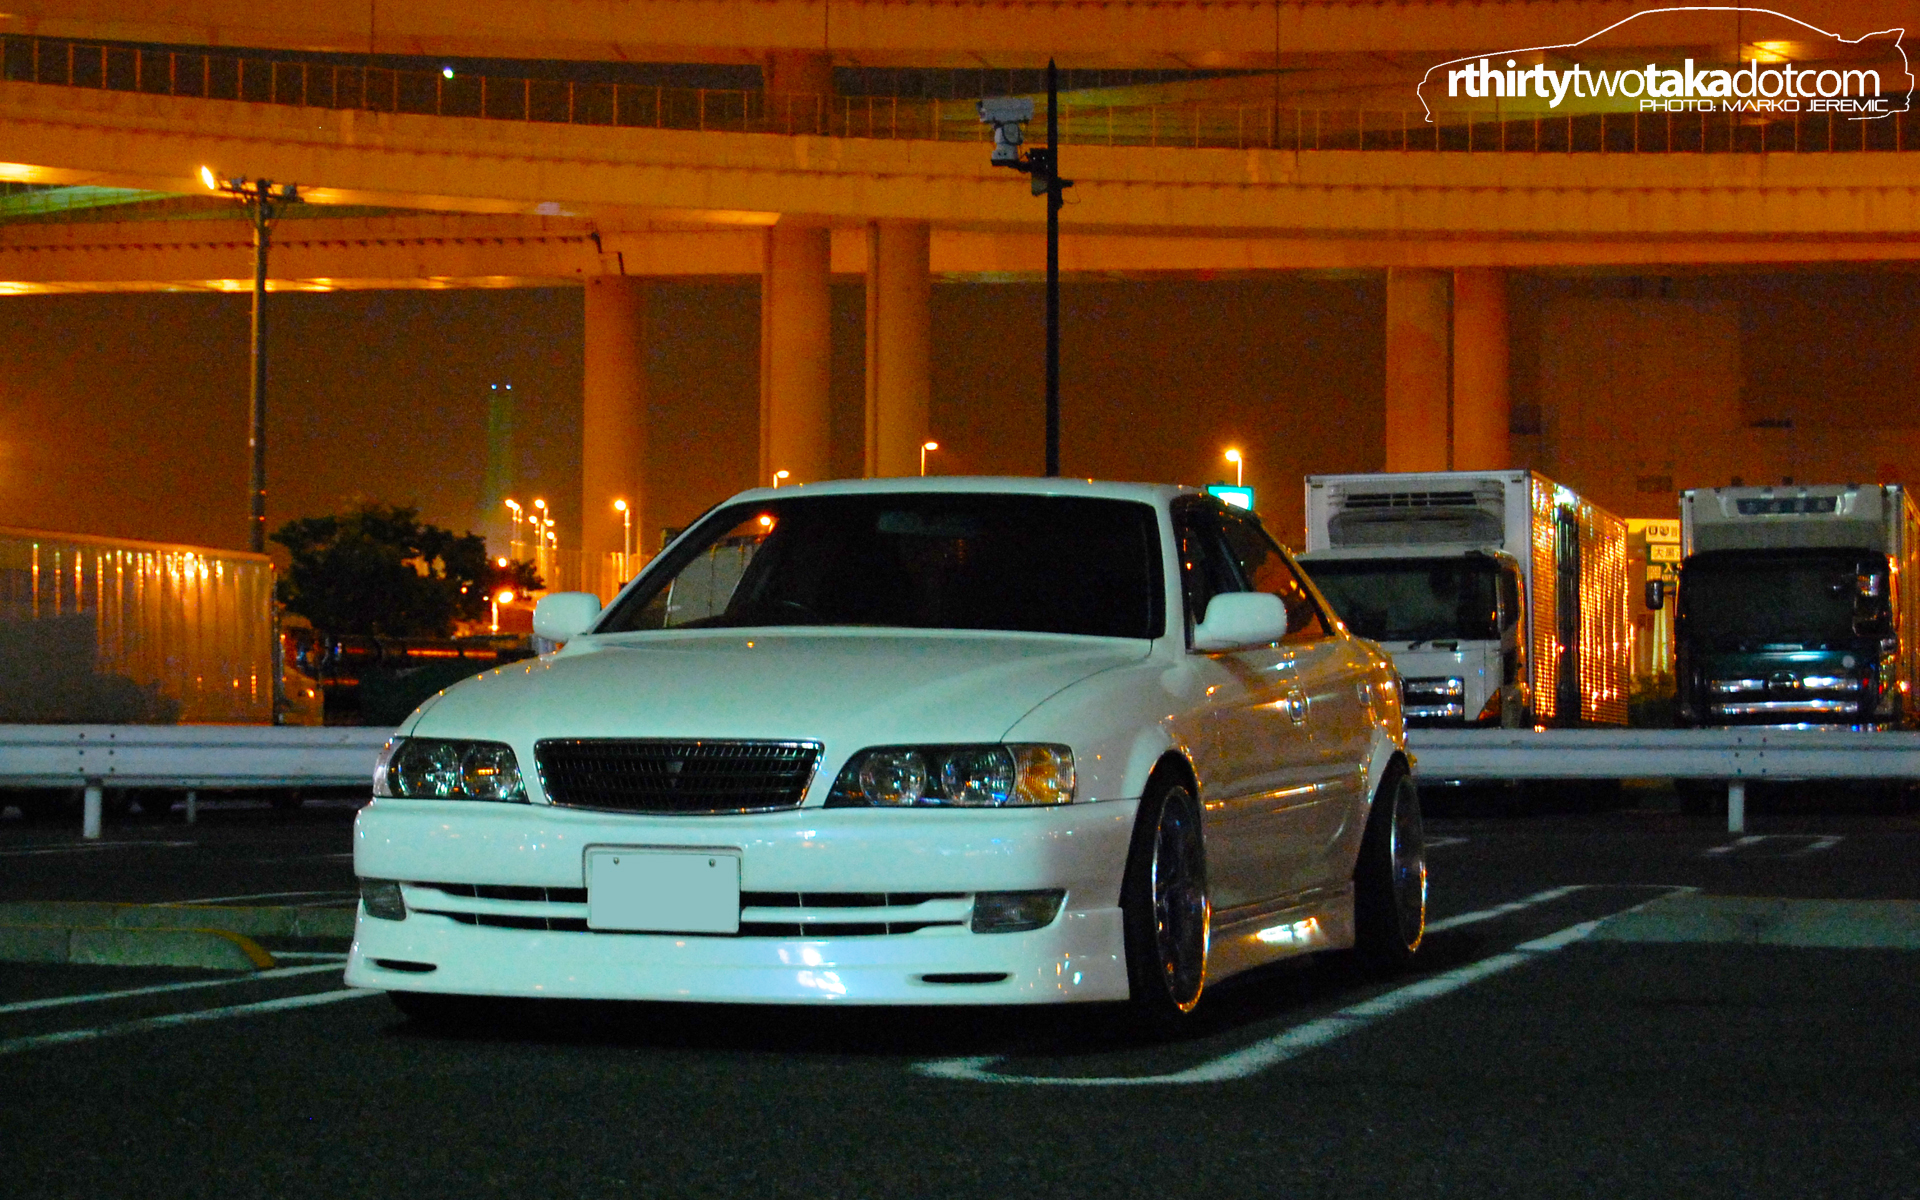 Cleanest Toyota Chaser JZX100 r32taka